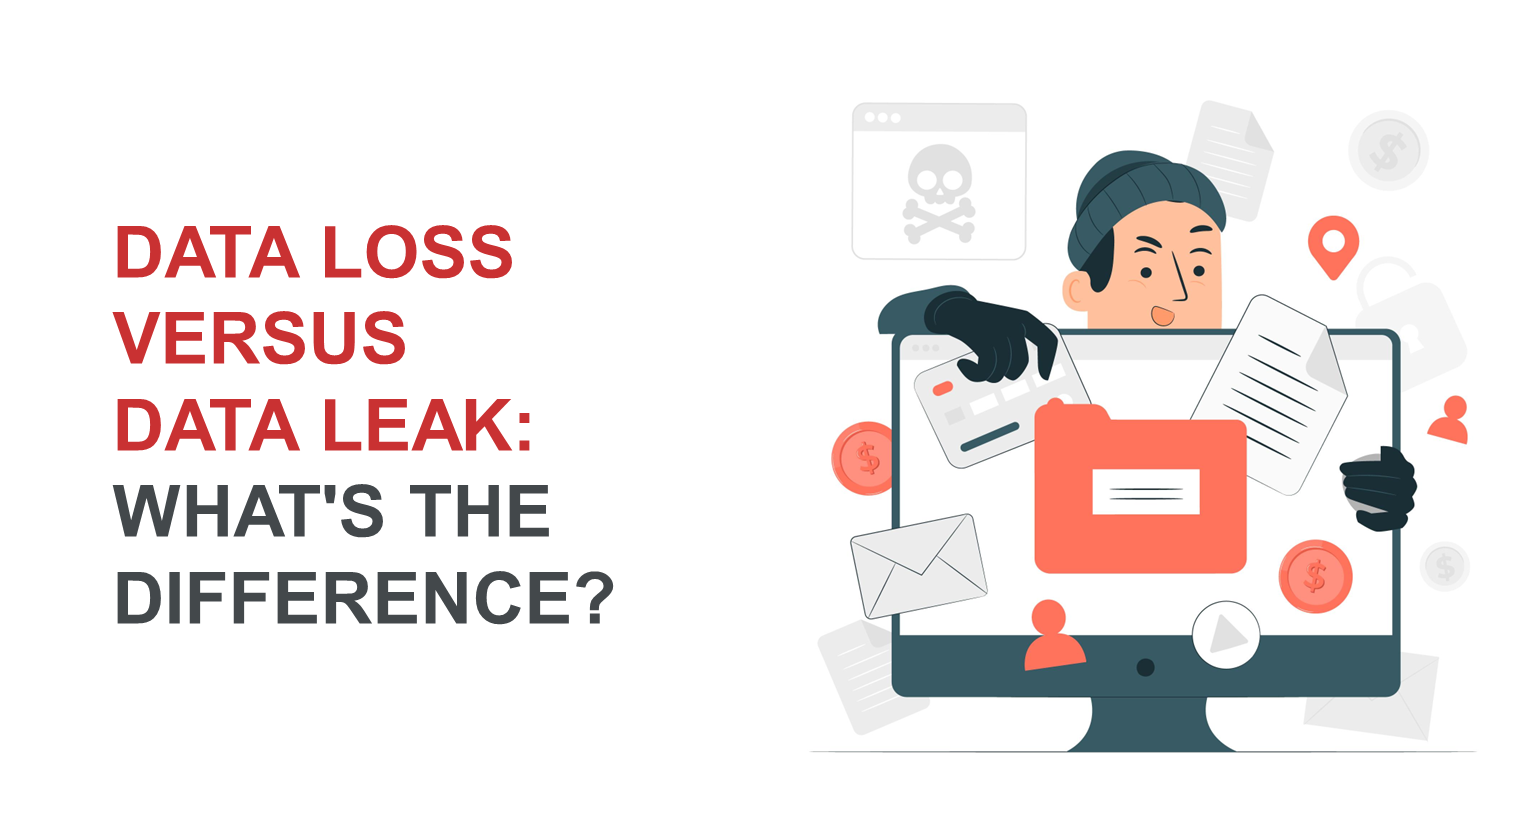 Data Loss versus Data Leak: What's the Difference?